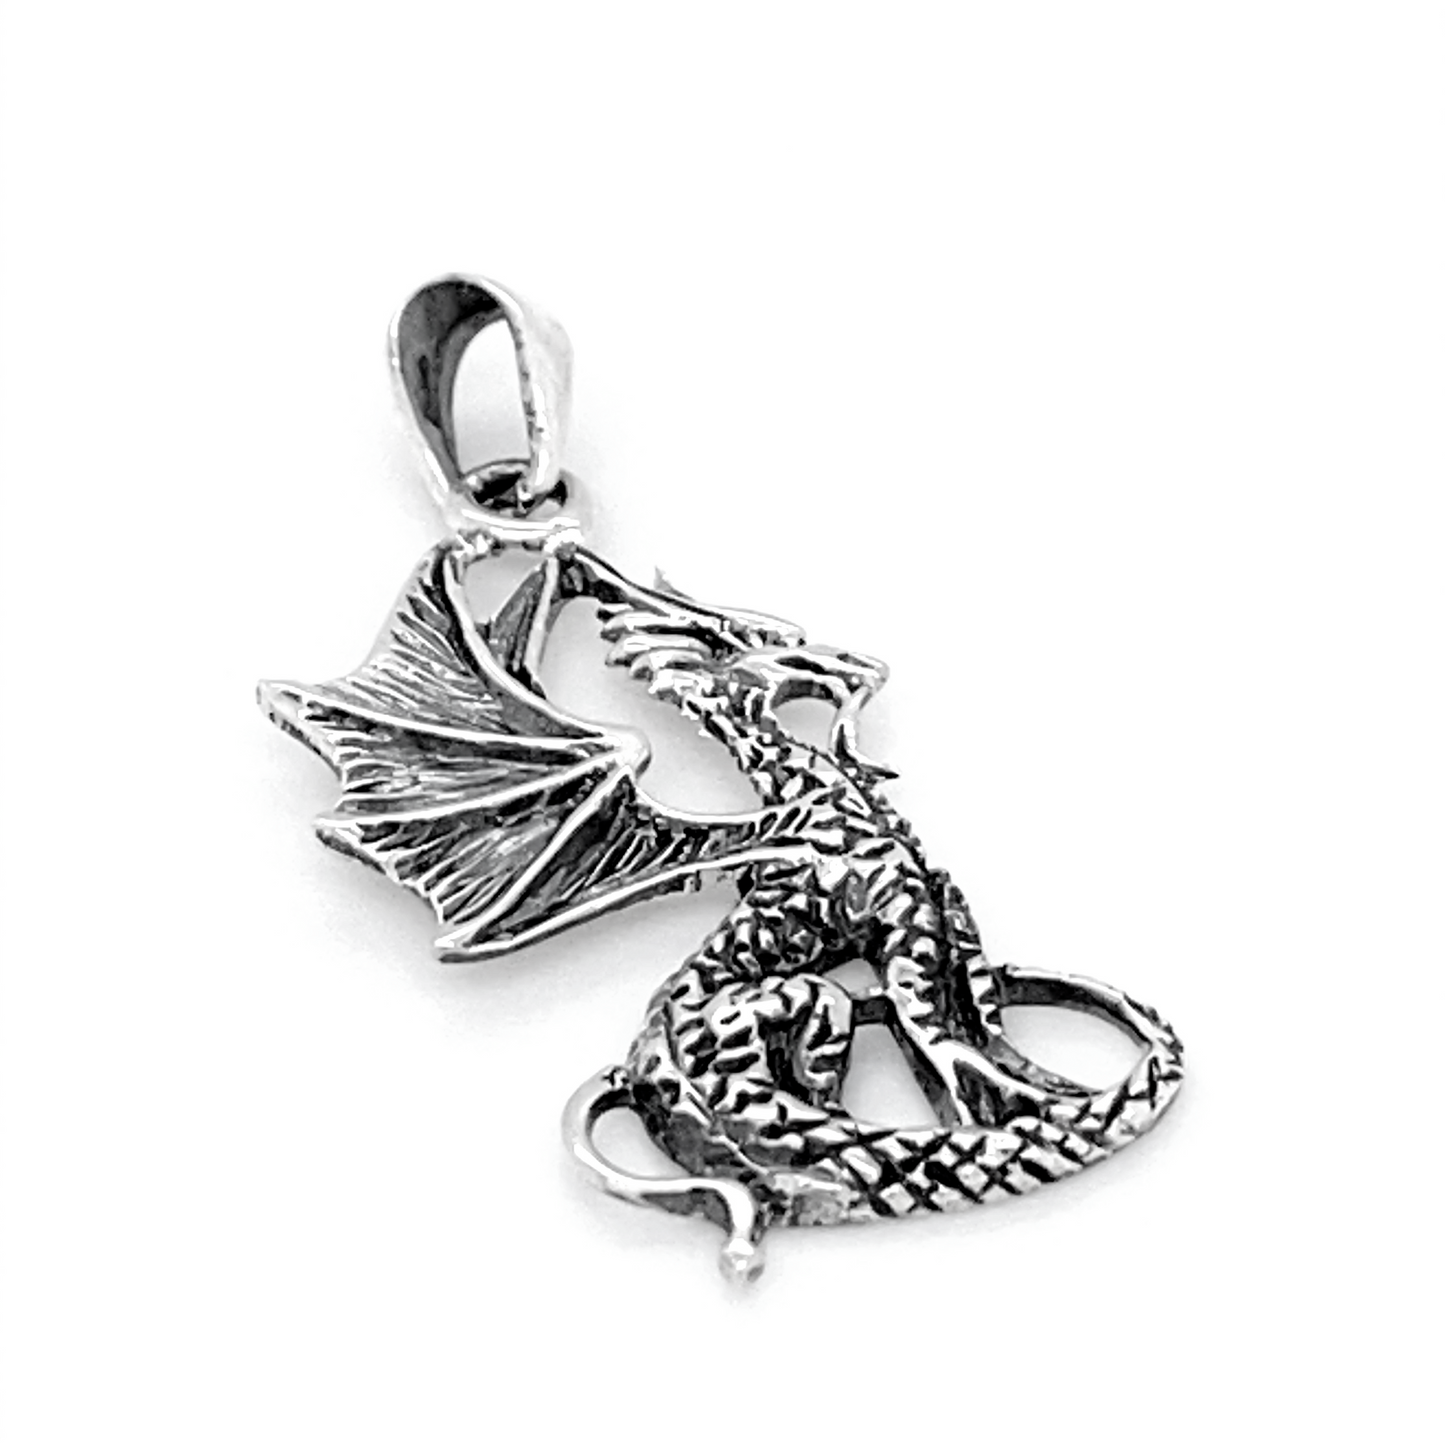 A Super Silver Mythical Dragon Pendant on a white background.